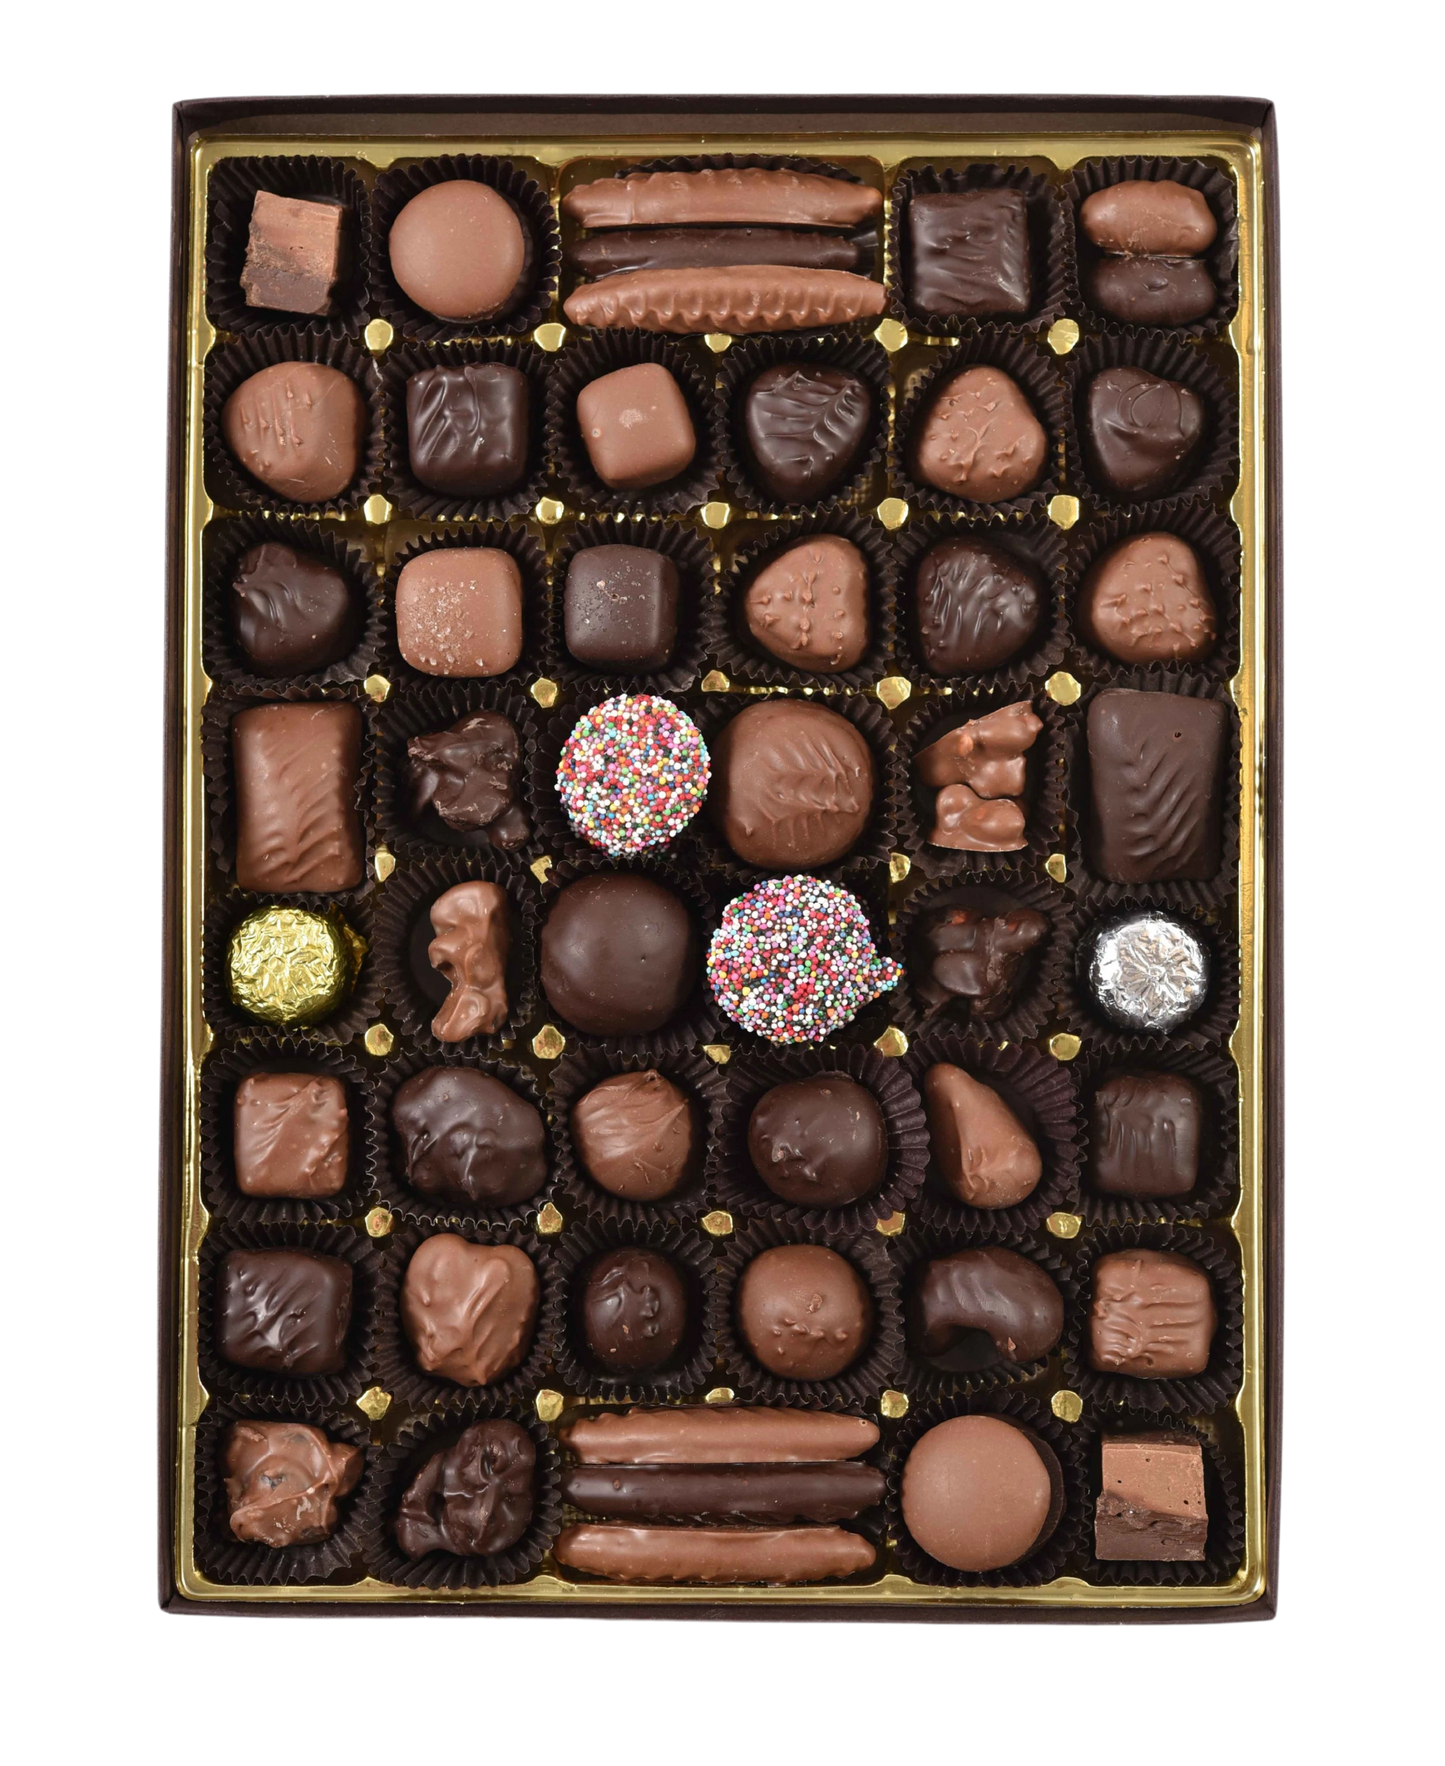 Large assortment of our favorite chocolates